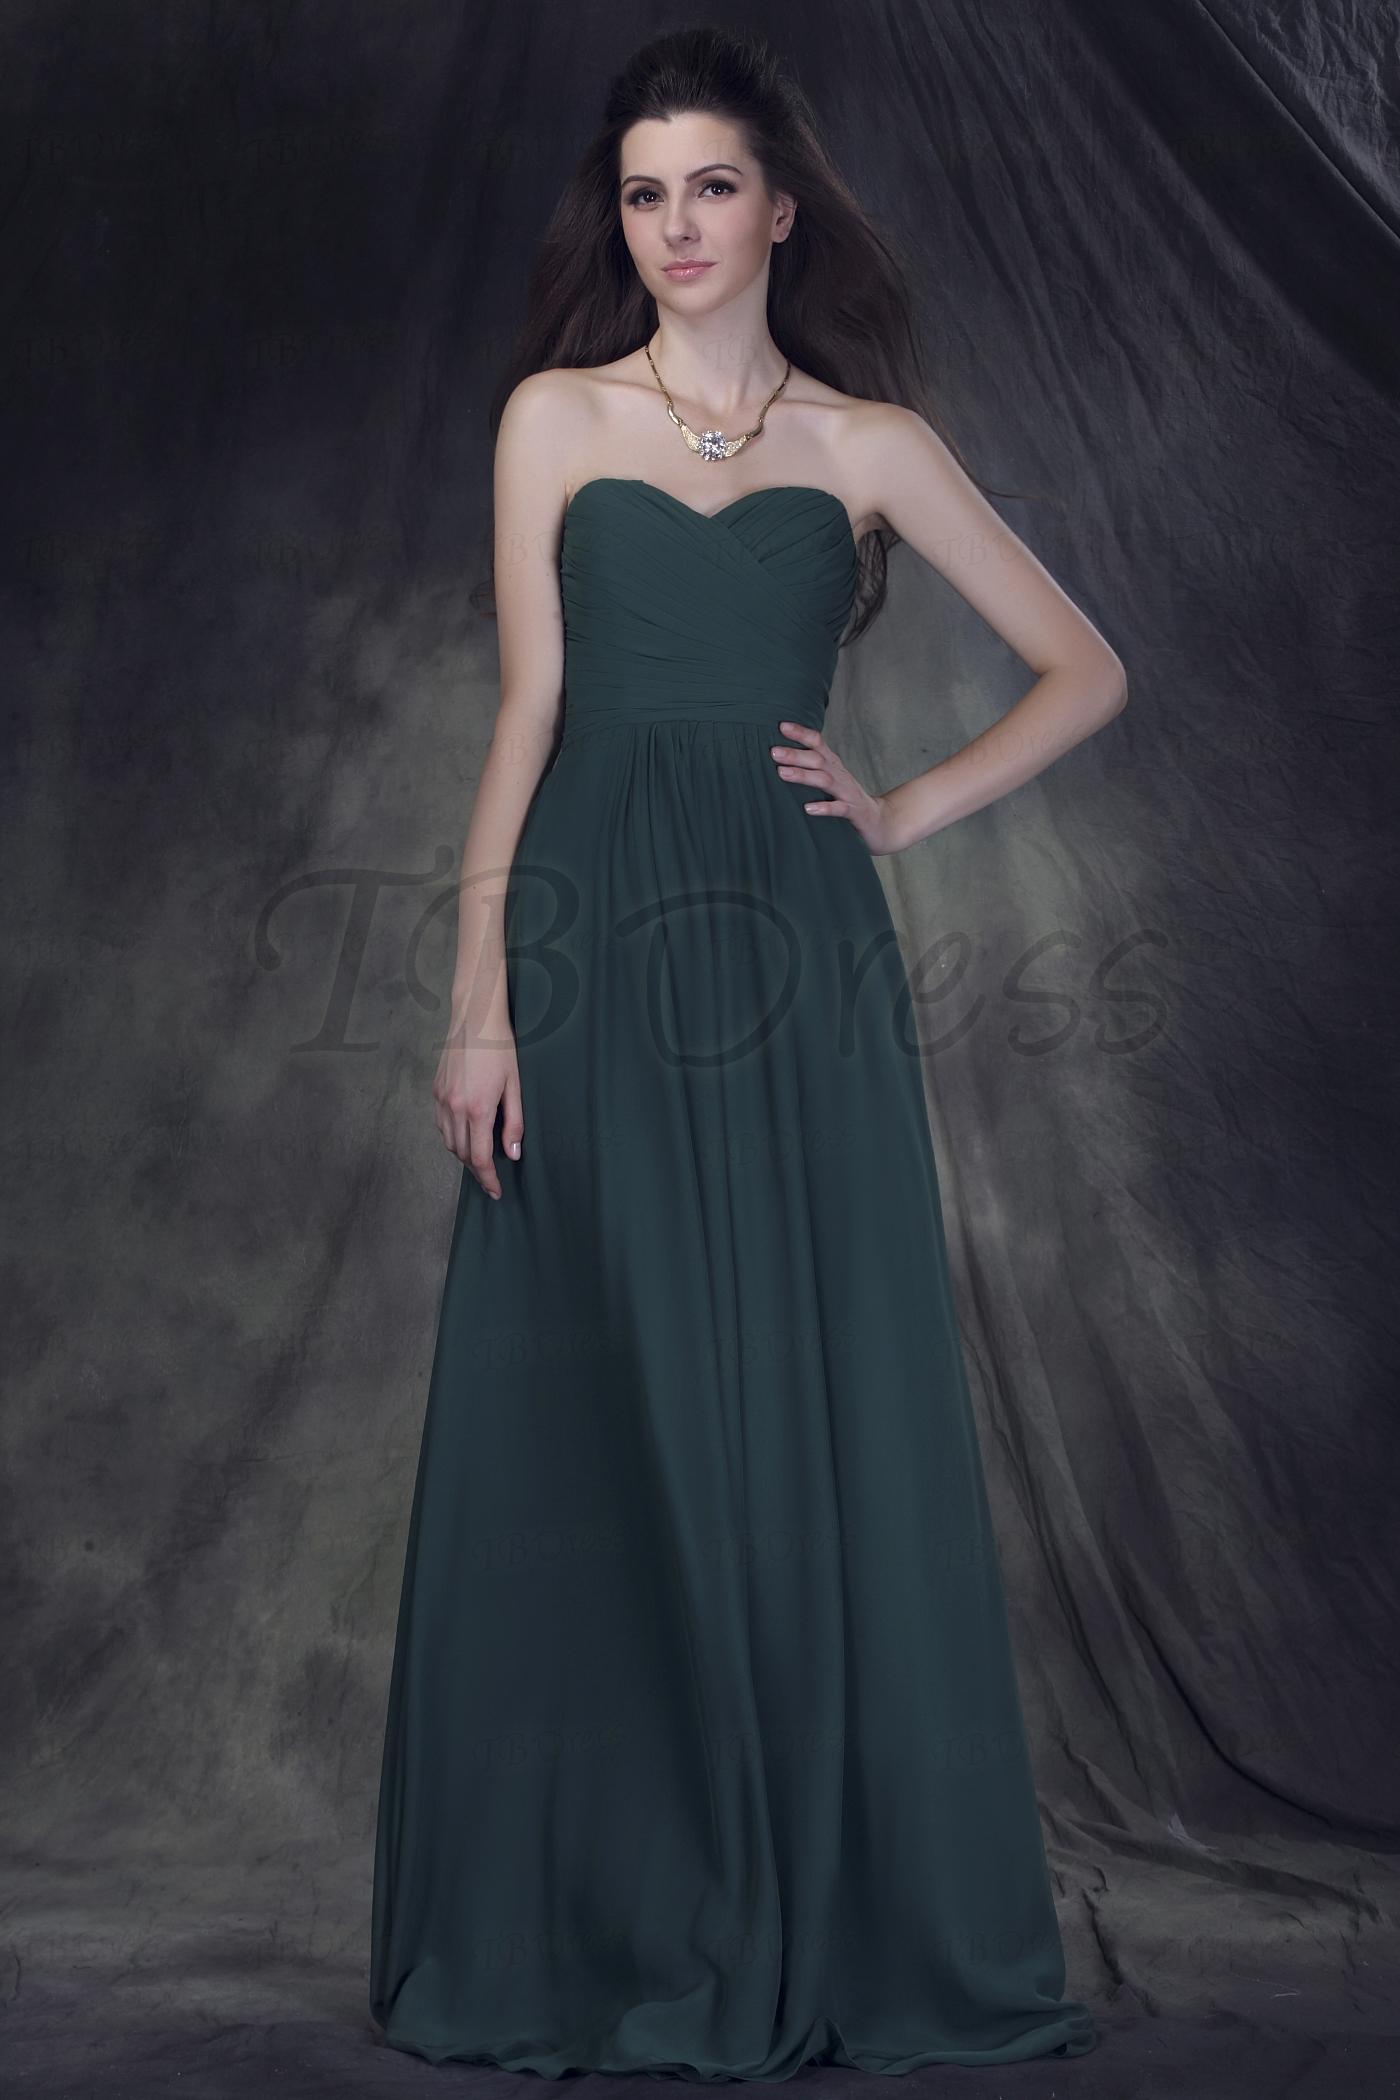 Exquisite Ruched A-Line Sweetheart Long Bridesmaid Dress